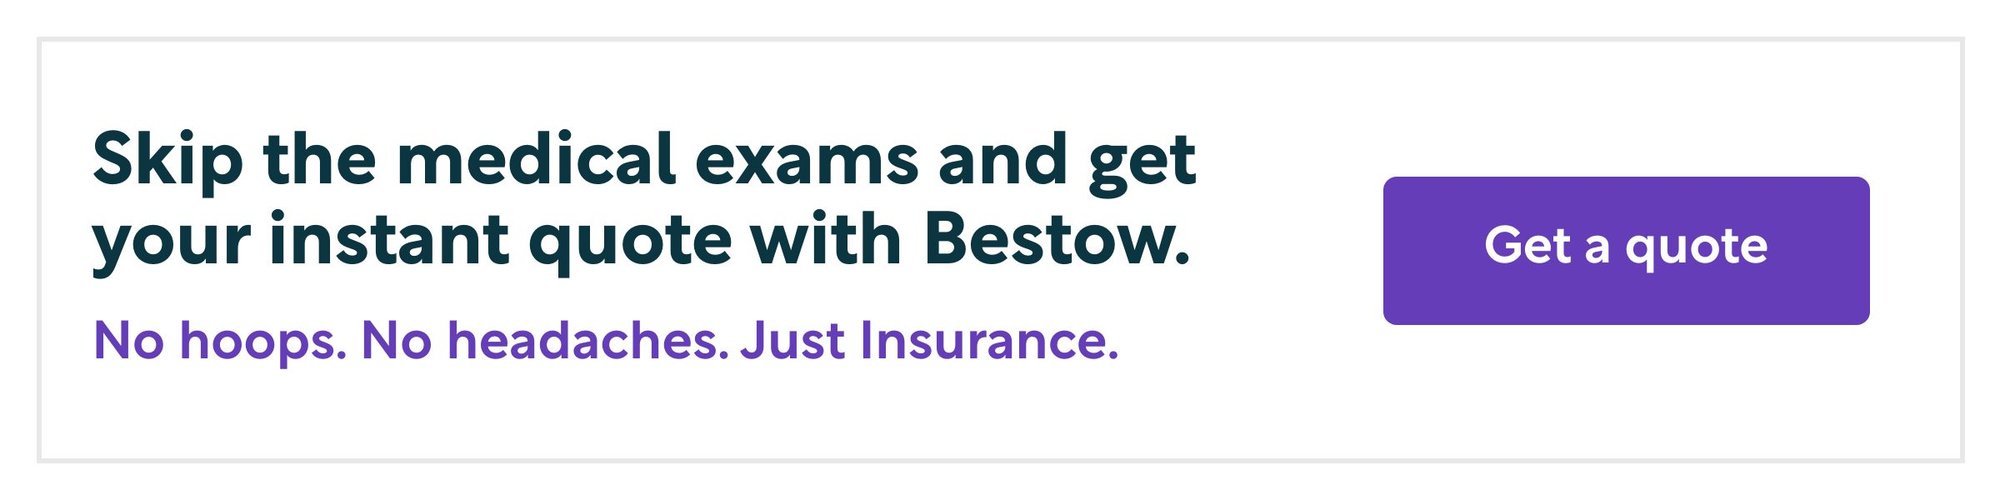 Skip the medical exams and get your instant quote with Bestow. No hoops. No headaches. Just insurance. Get a quote.